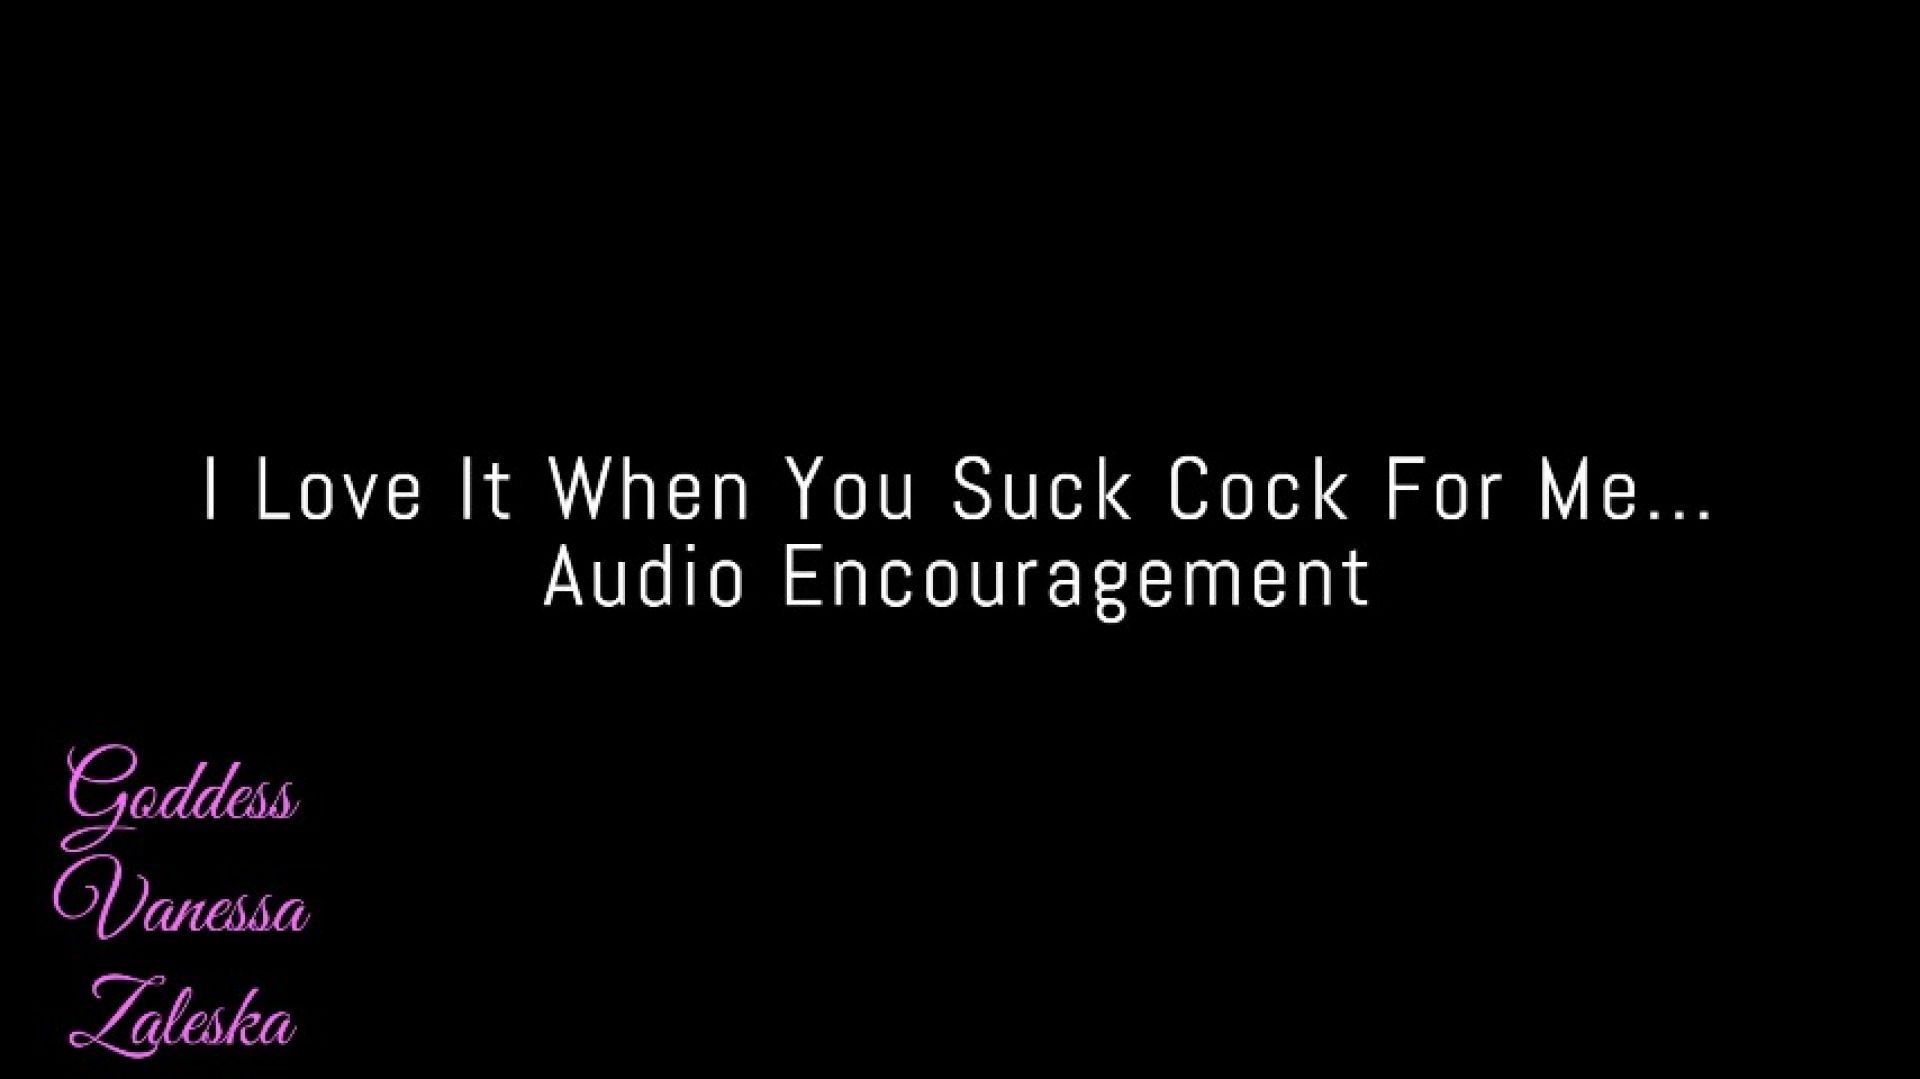 I Love It When You Suck Cock For Me! Audio